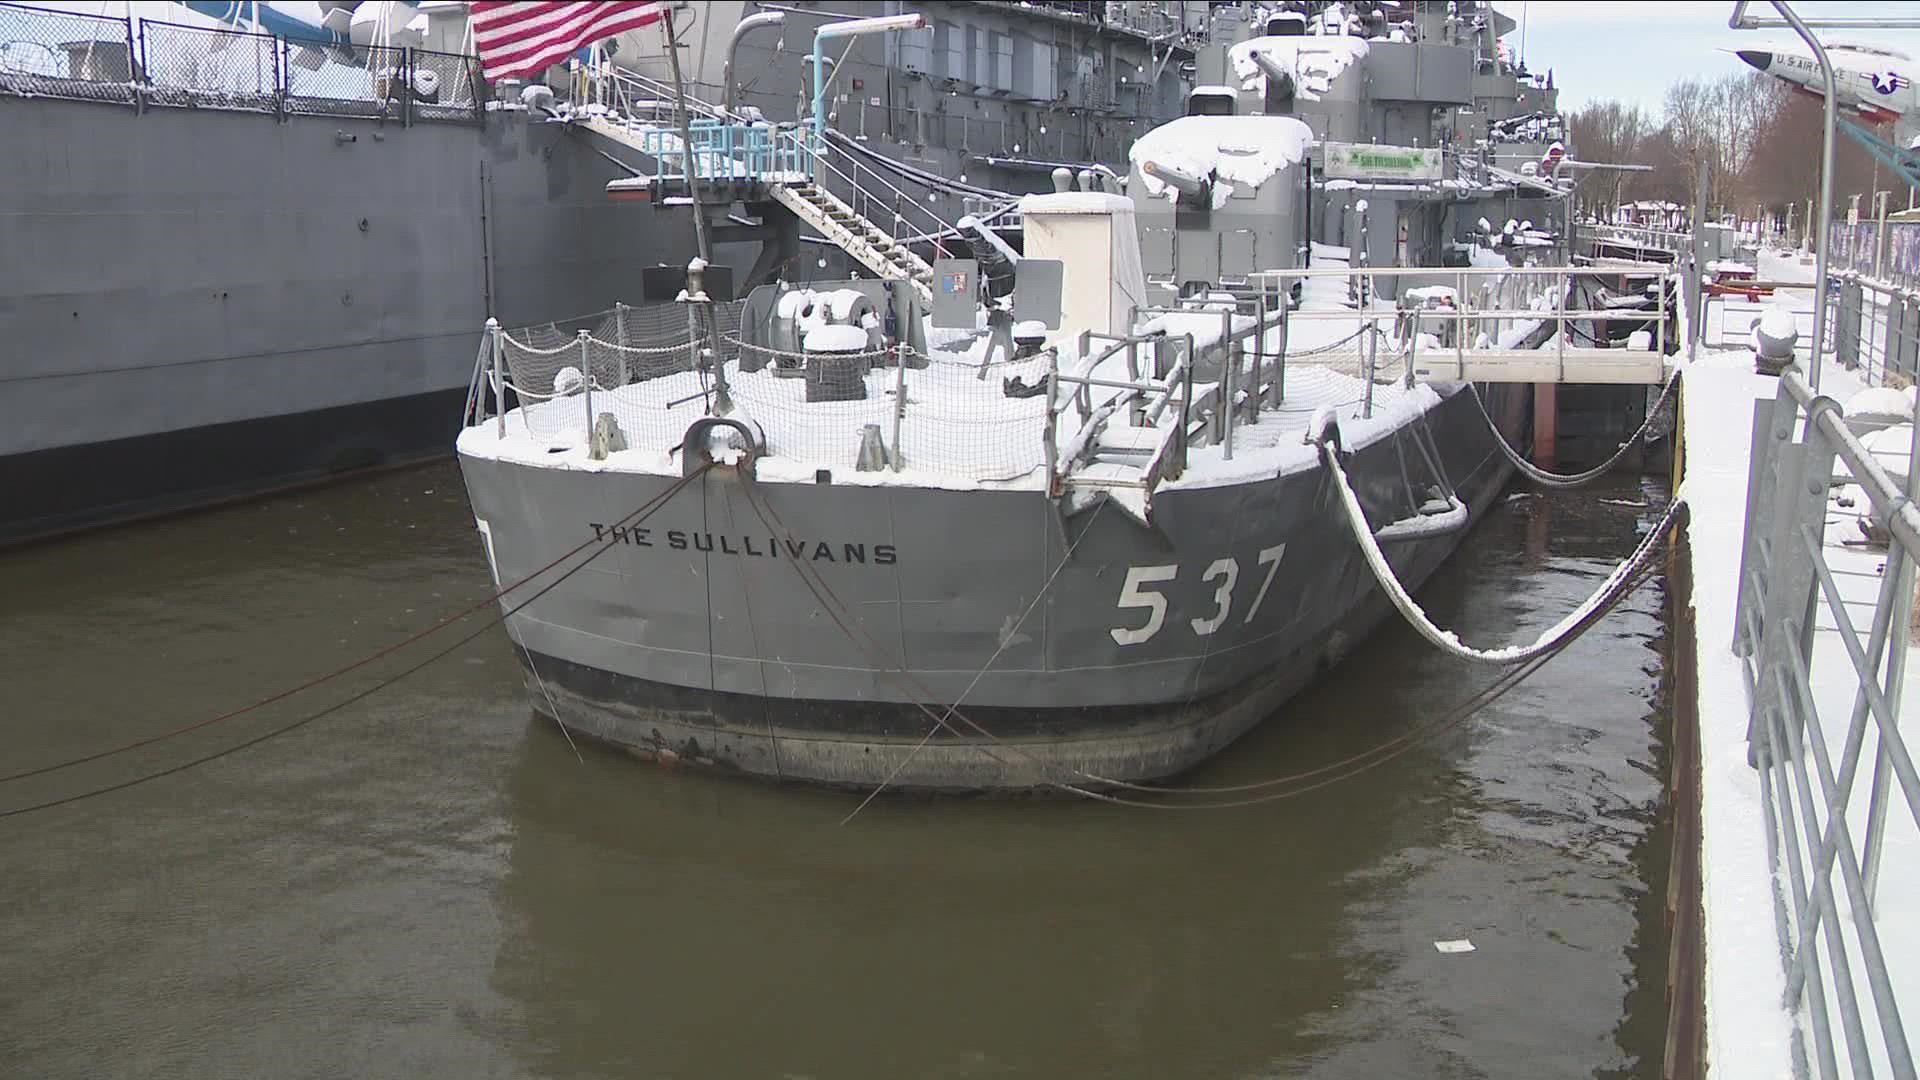 The Naval Park explained how it would be working to prevent further damage to the USS the Sullivans this winter.